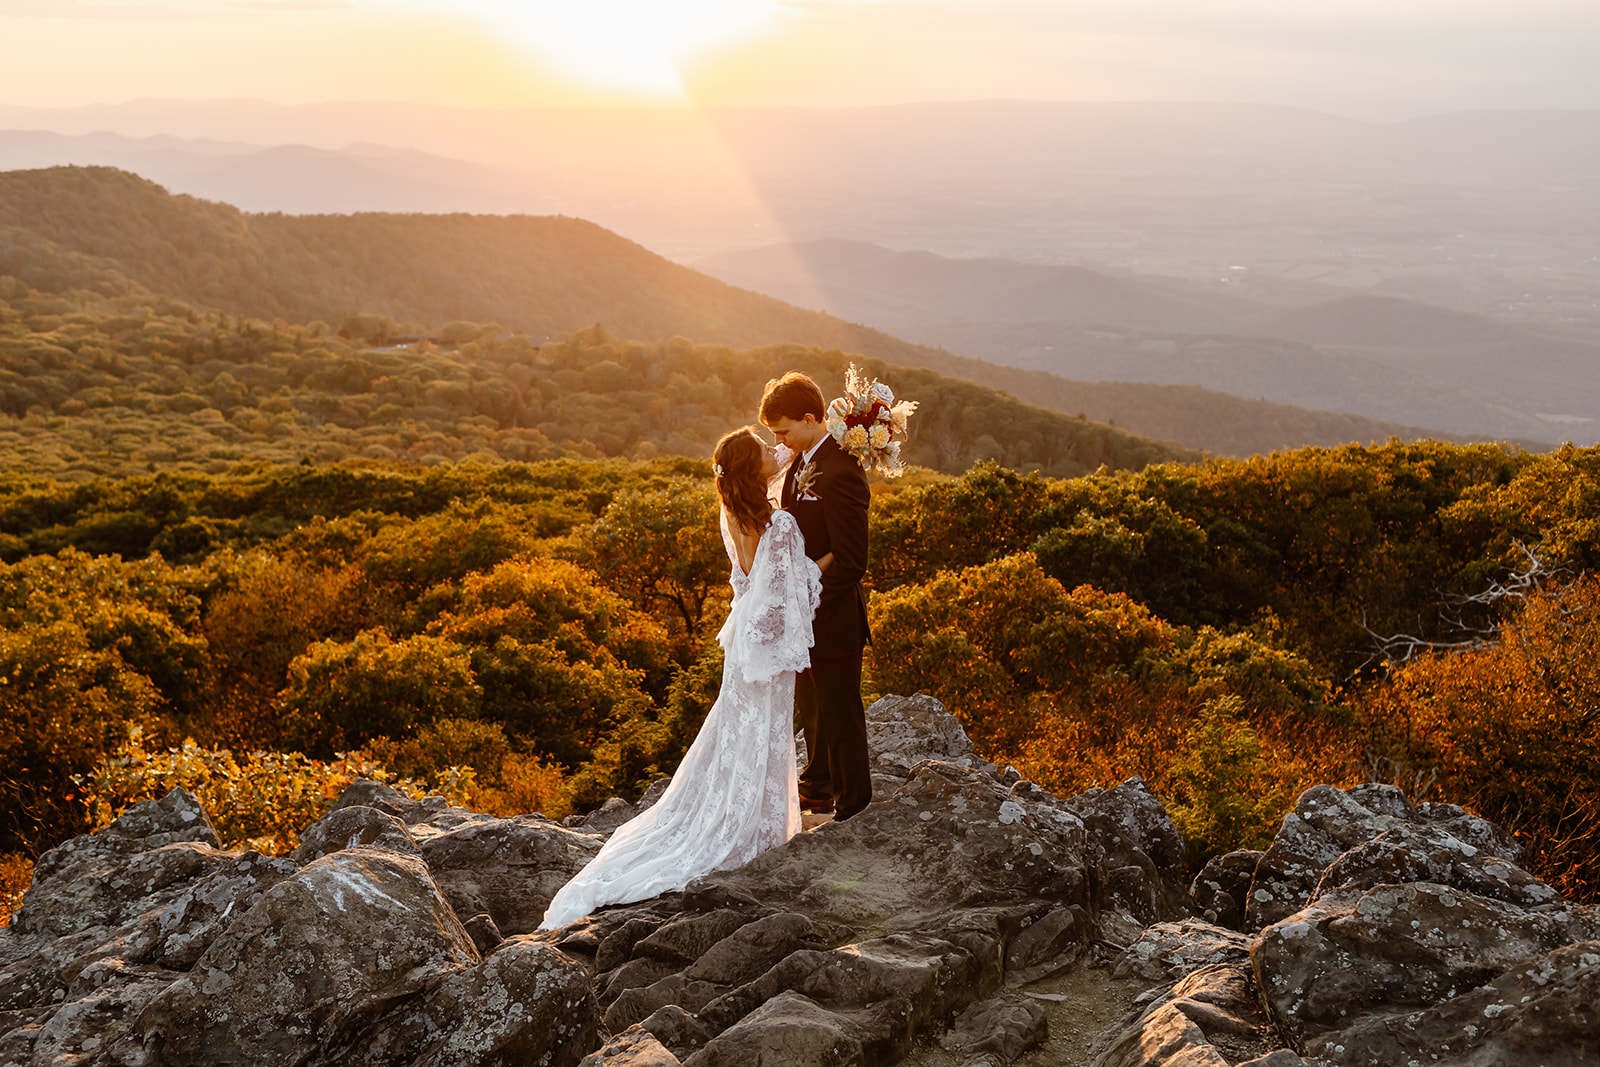 the wedding couple during their hiking ceremony